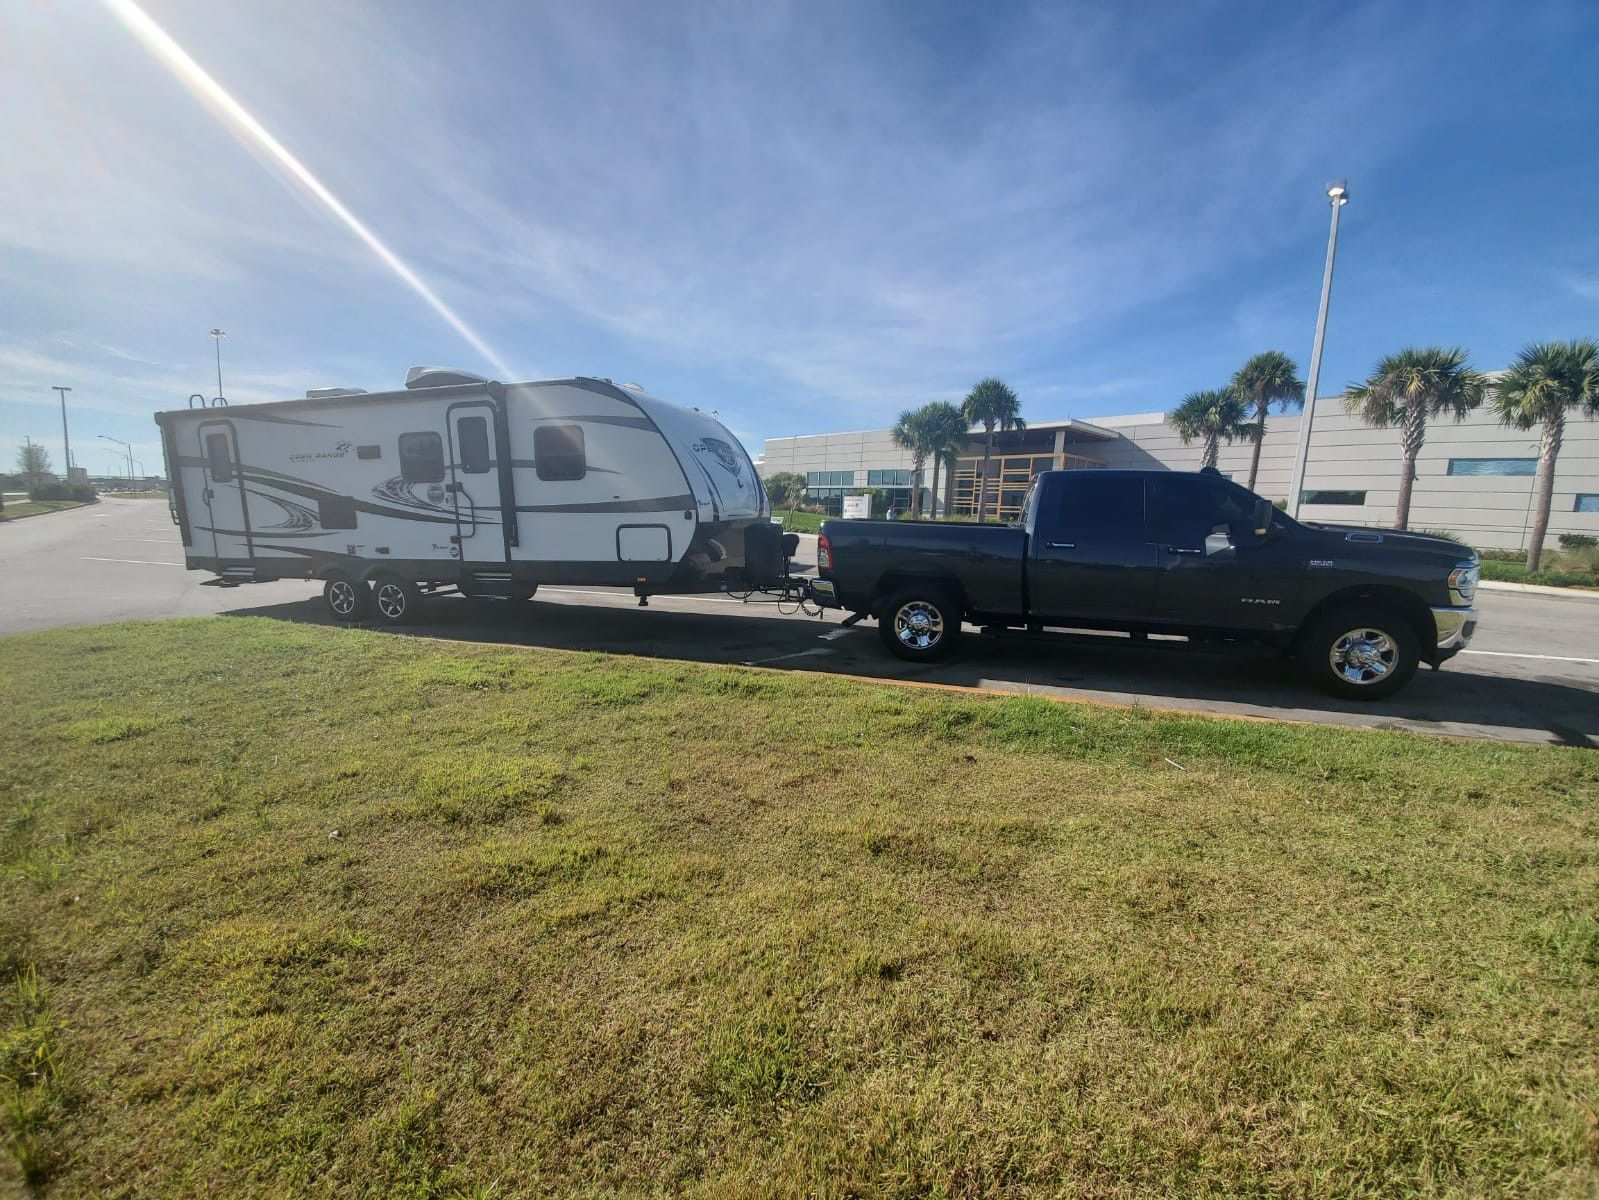 Need to park and store a 30 foot travel trailer/RV